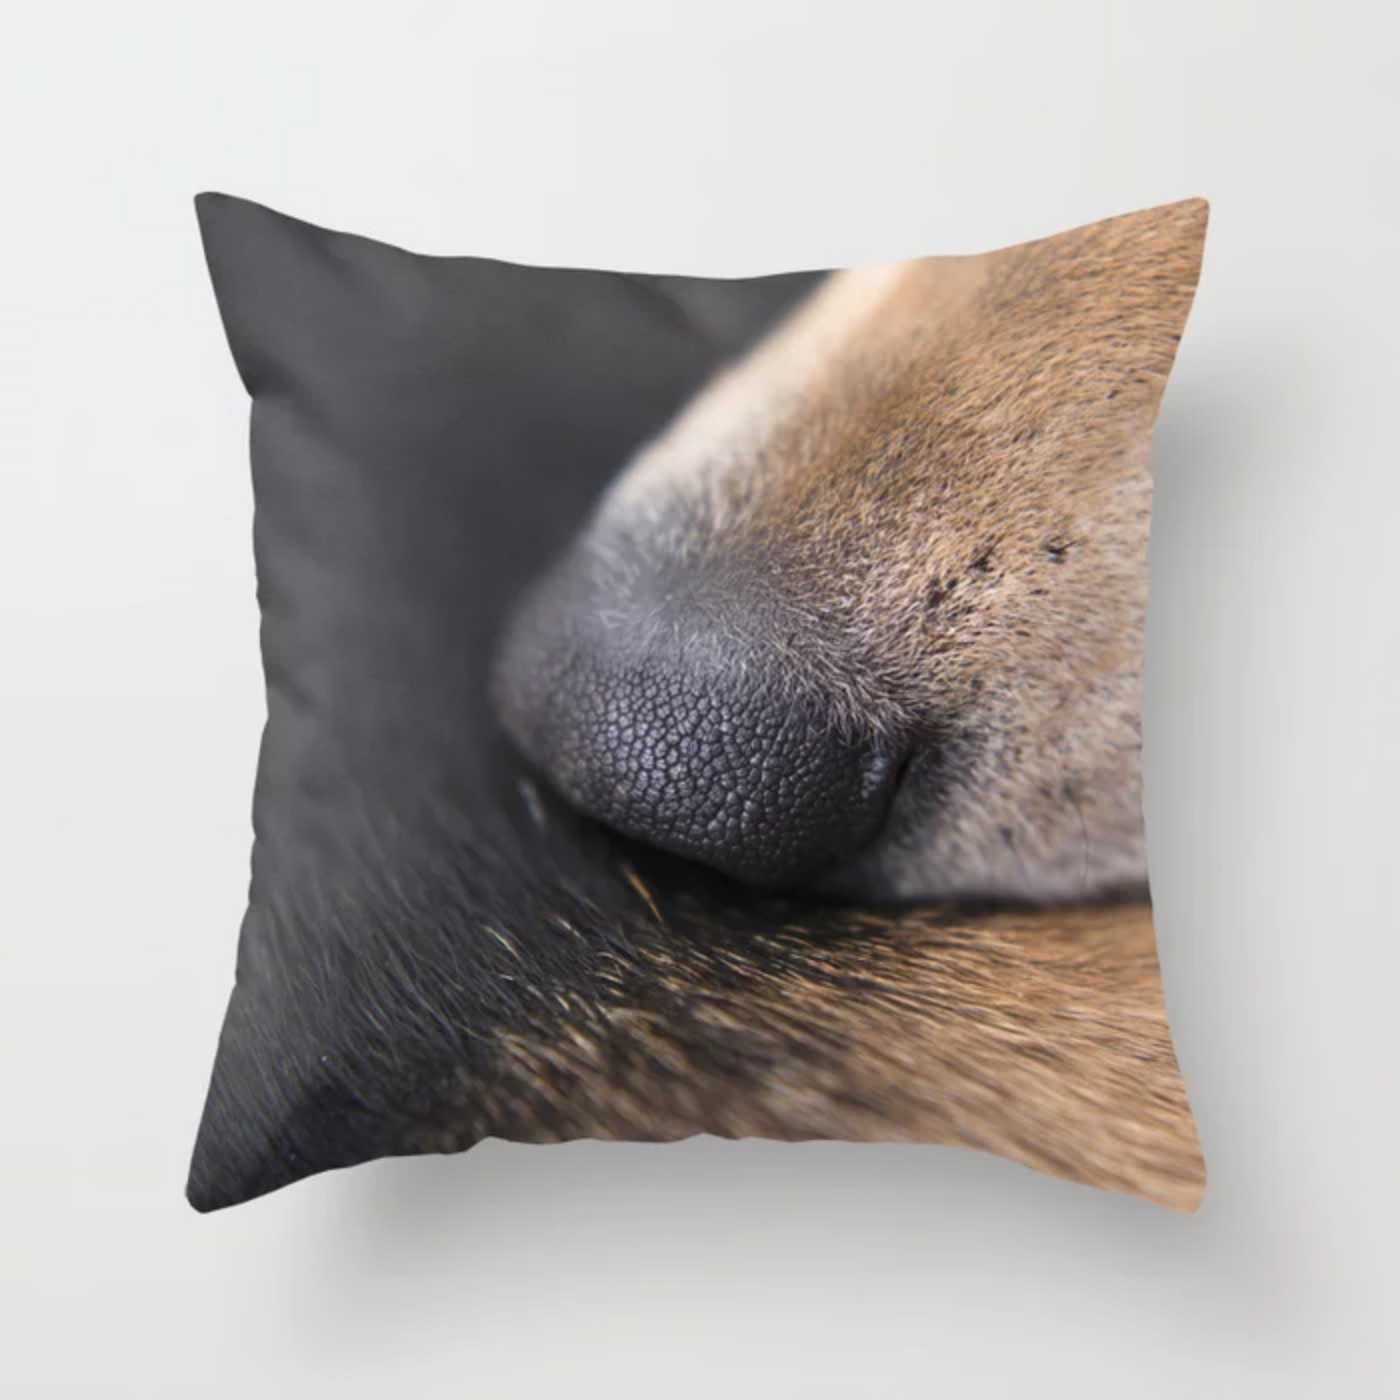 DOGvision, Fenne Kustermans, gifts for dog lovers, art prints, and wall art for dog lovers, www.DOGvision.eu - society6.com/dogvision